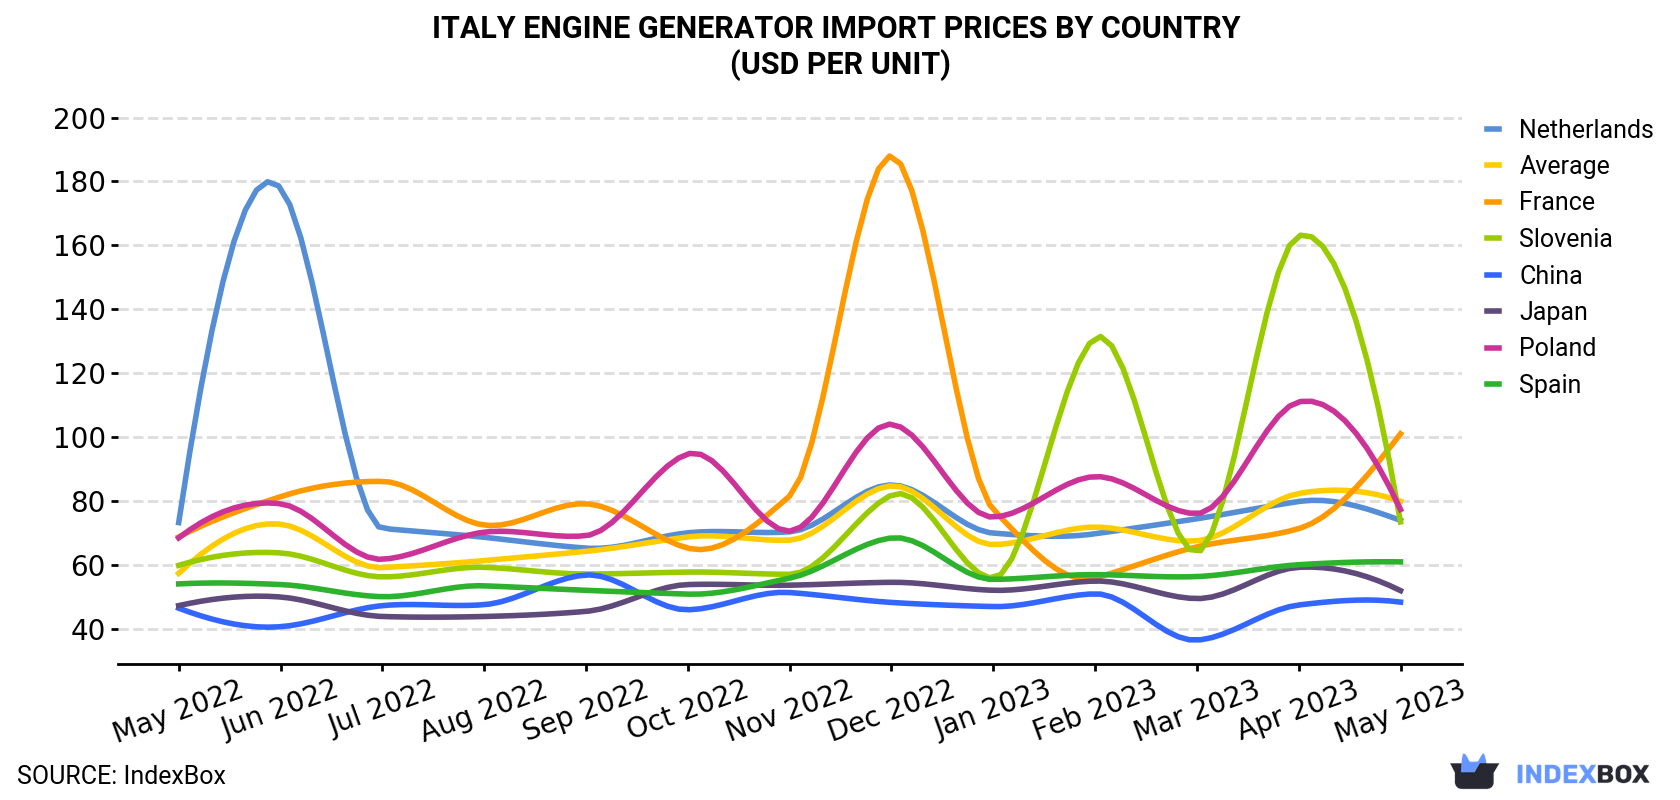 Italy Engine Generator Import Prices By Country (USD Per Unit)